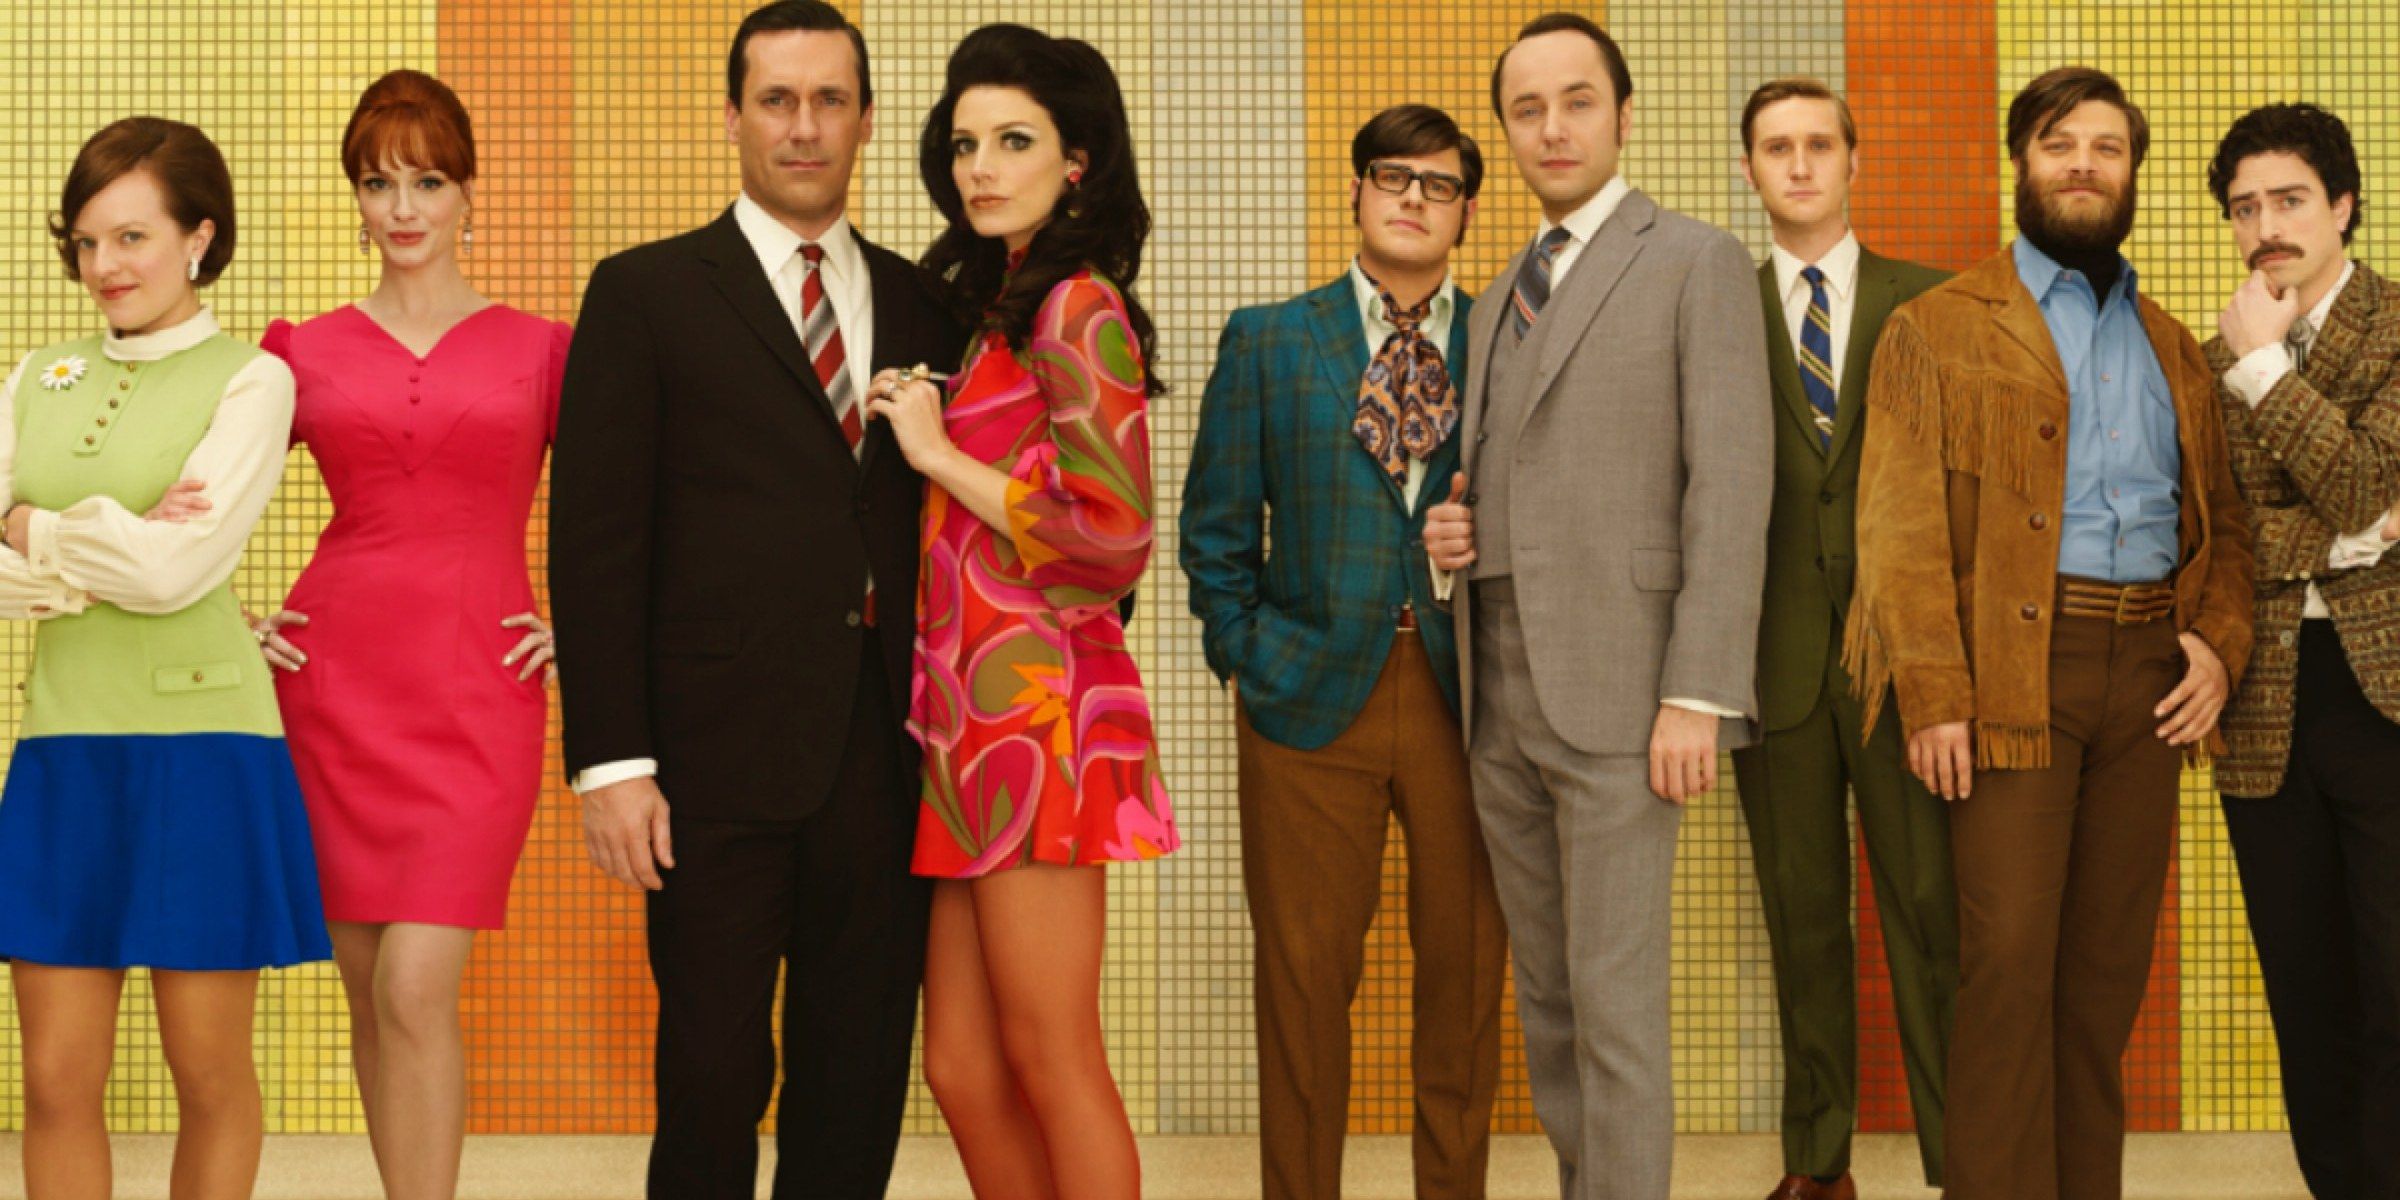 15 Shows To Watch If You Like Mad Men | ScreenRant